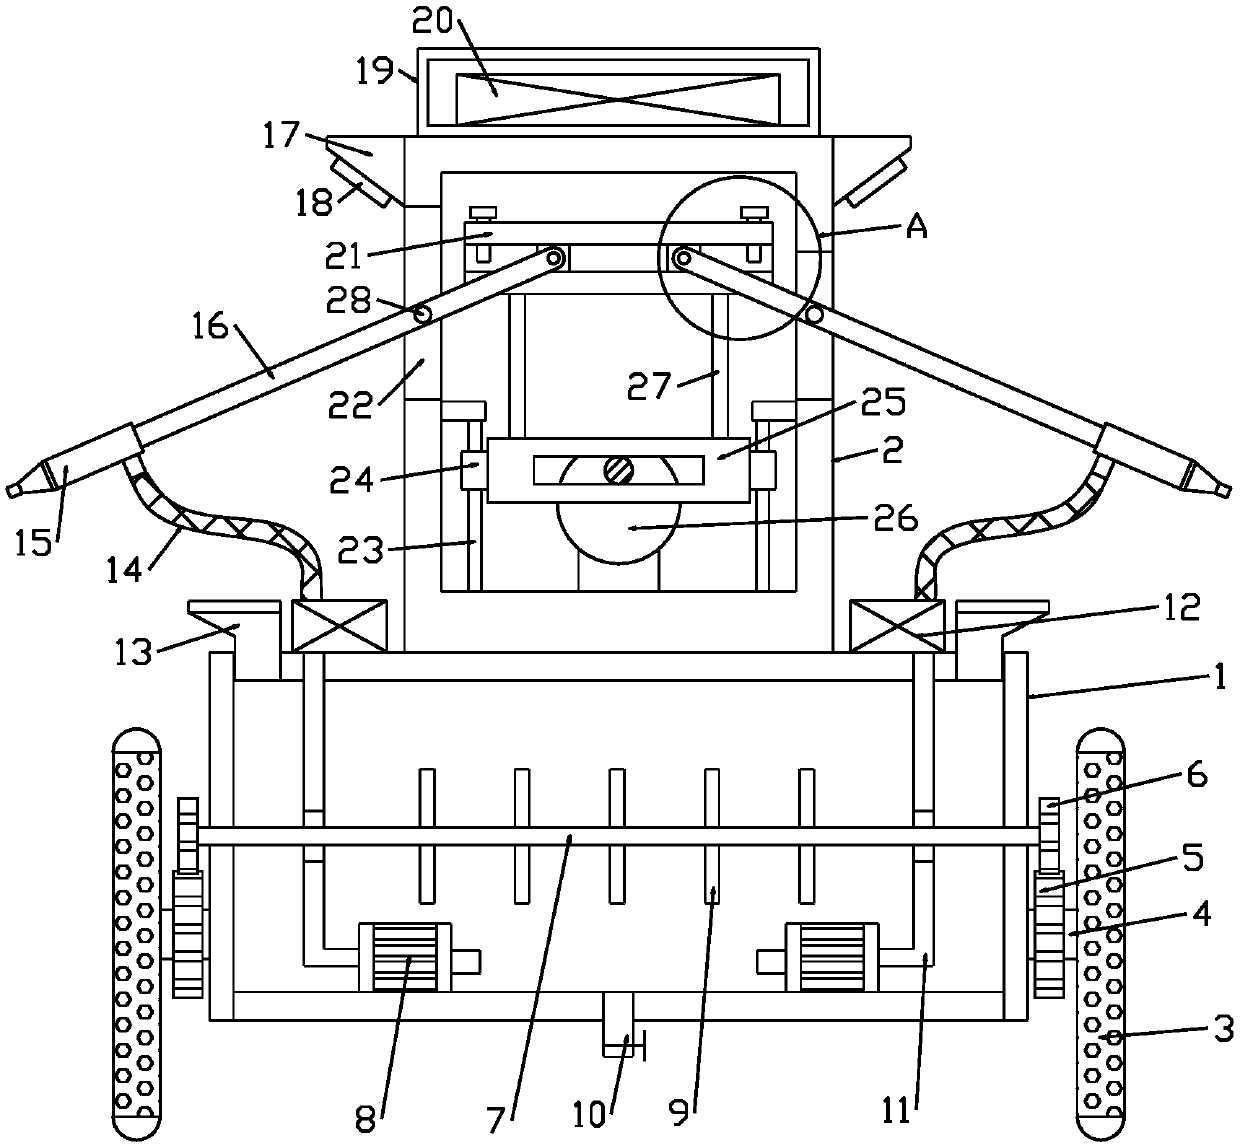 Double-arm swing type agricultural spraying device